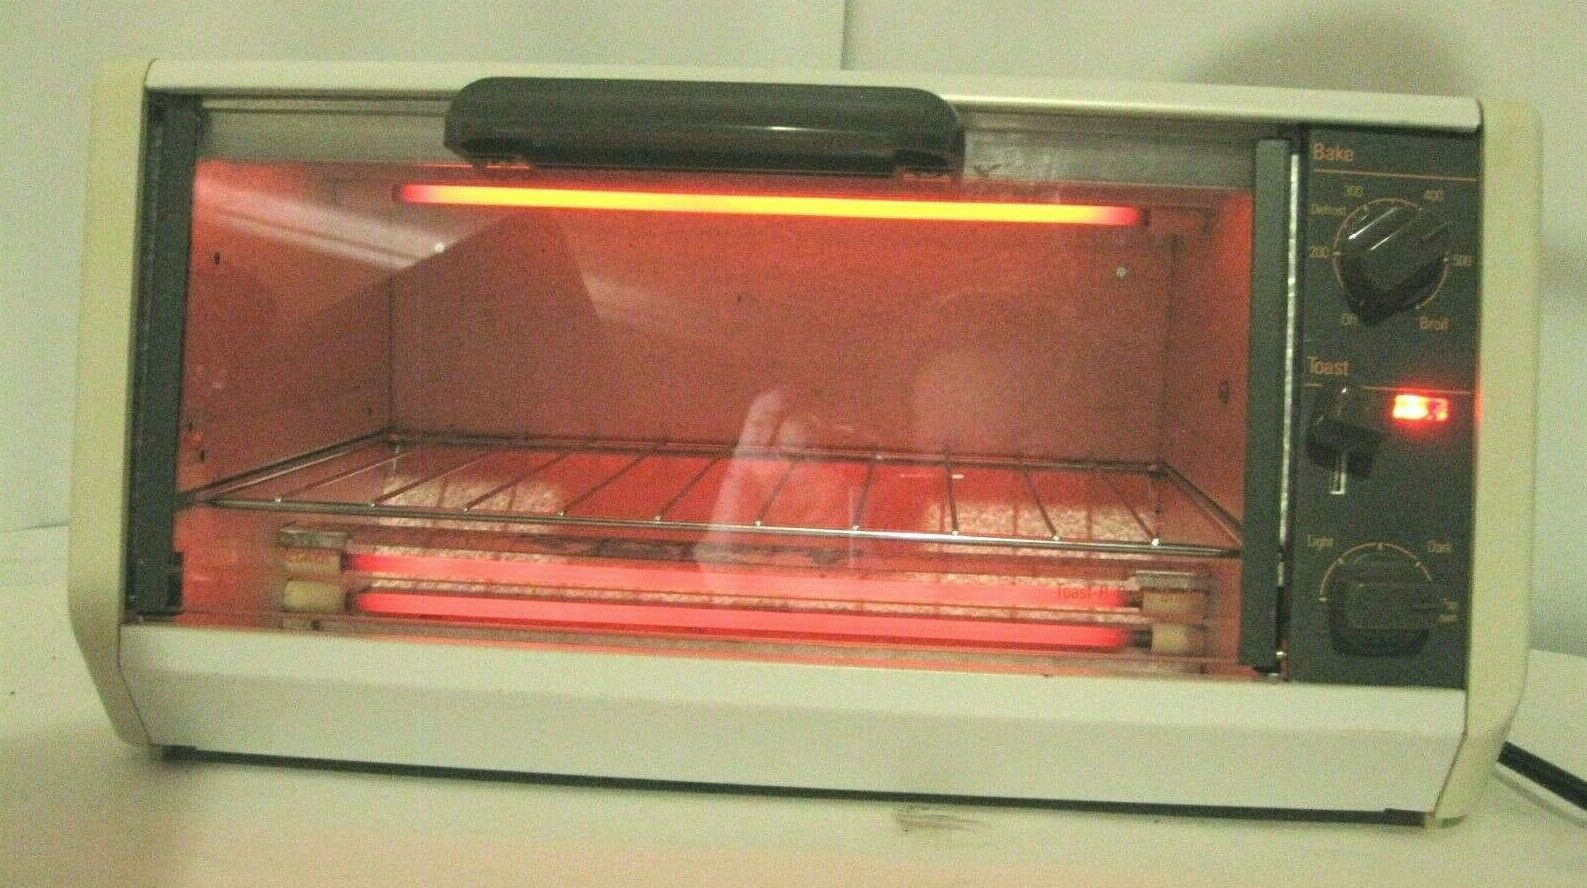 black and decker space saver toaster oven parts